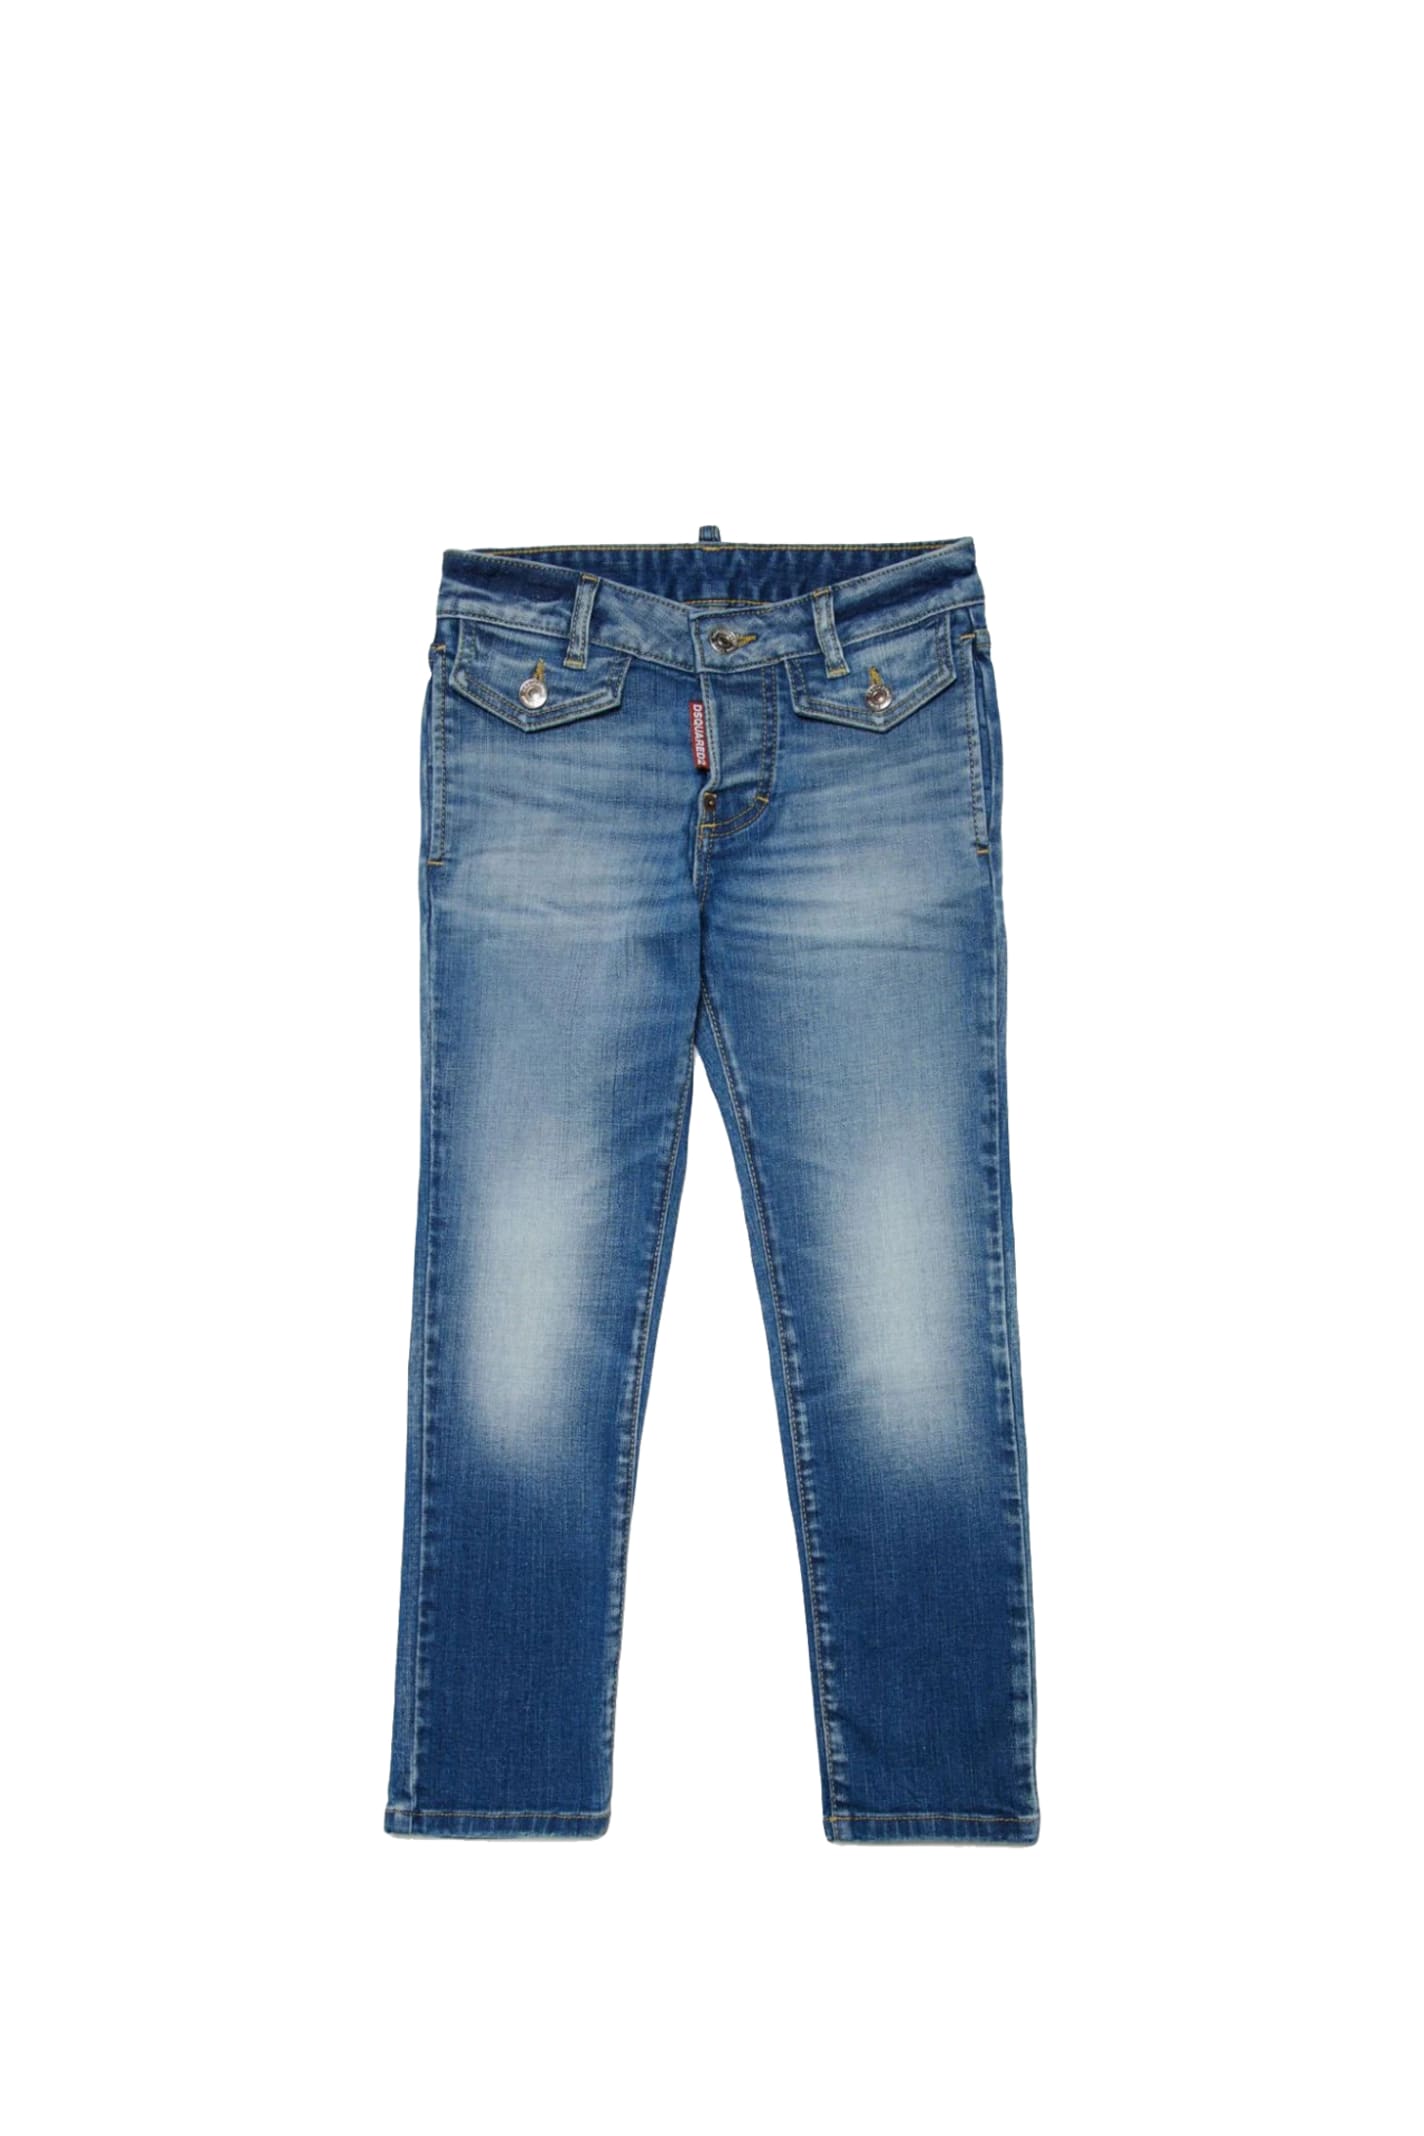 Dsquared2 Slim Jeans With Embroidery